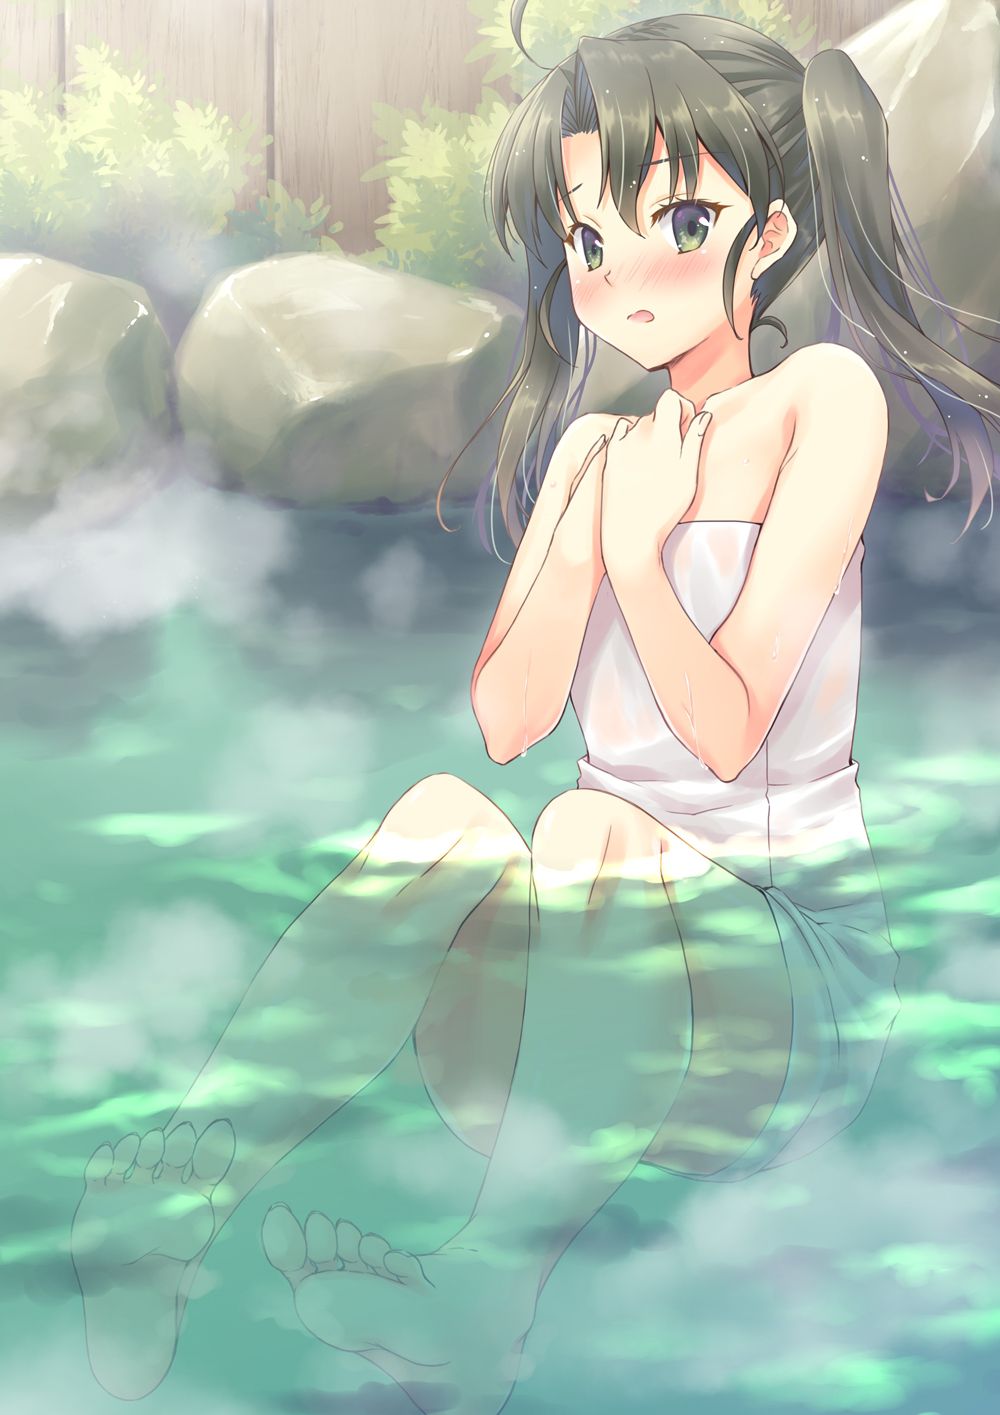 Erotic anime summary erotic image collection of beautiful girls and beautiful girls taking a bath [50 sheets] 20